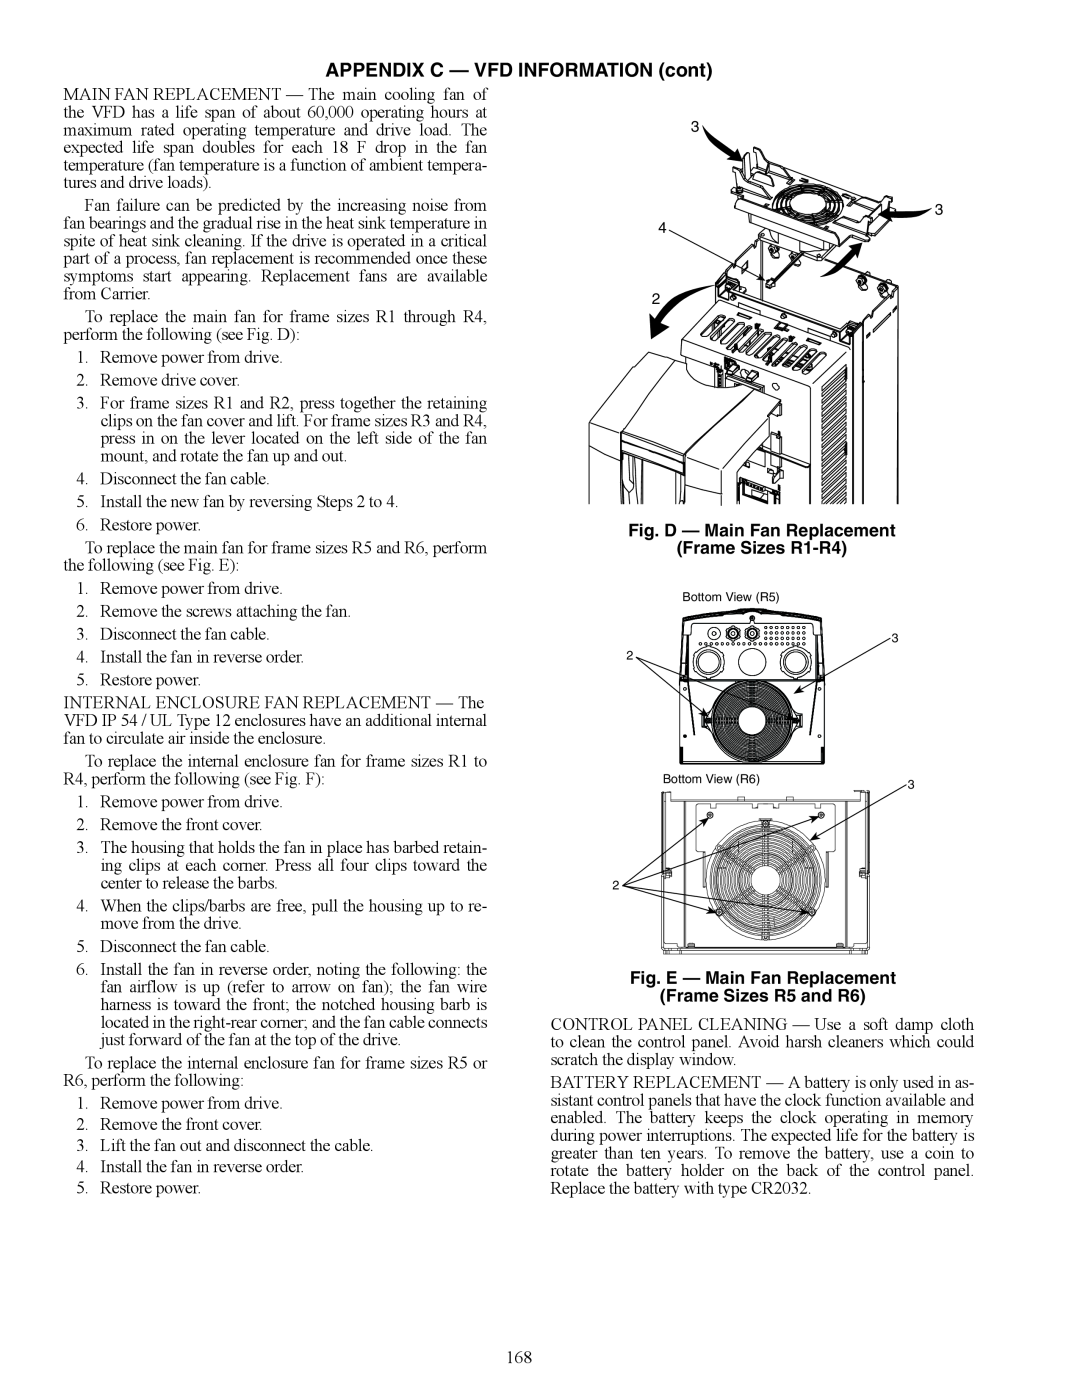 Carrier 48/50AJ Fig. D - Main Fan Replacement Frame Sizes R1-R4, Fig. E — Main Fan Replacement, Frame Sizes R5 and R6 